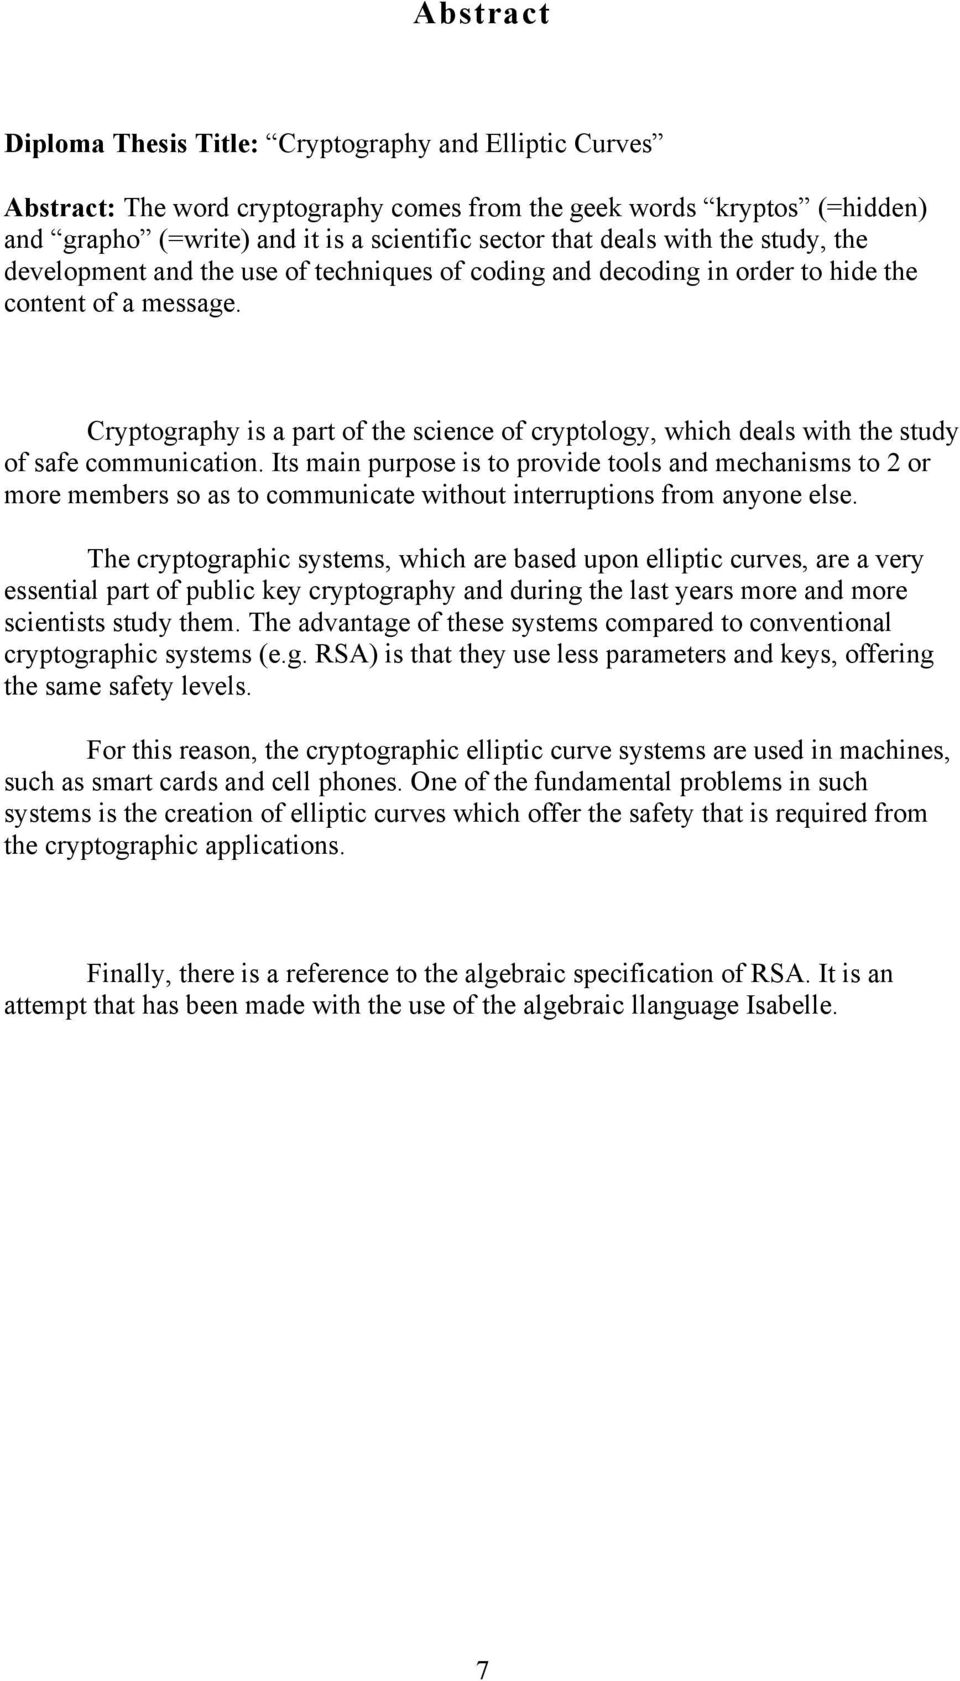 Cryptography is a part of the science of cryptology, which deals with the study of safe communication.